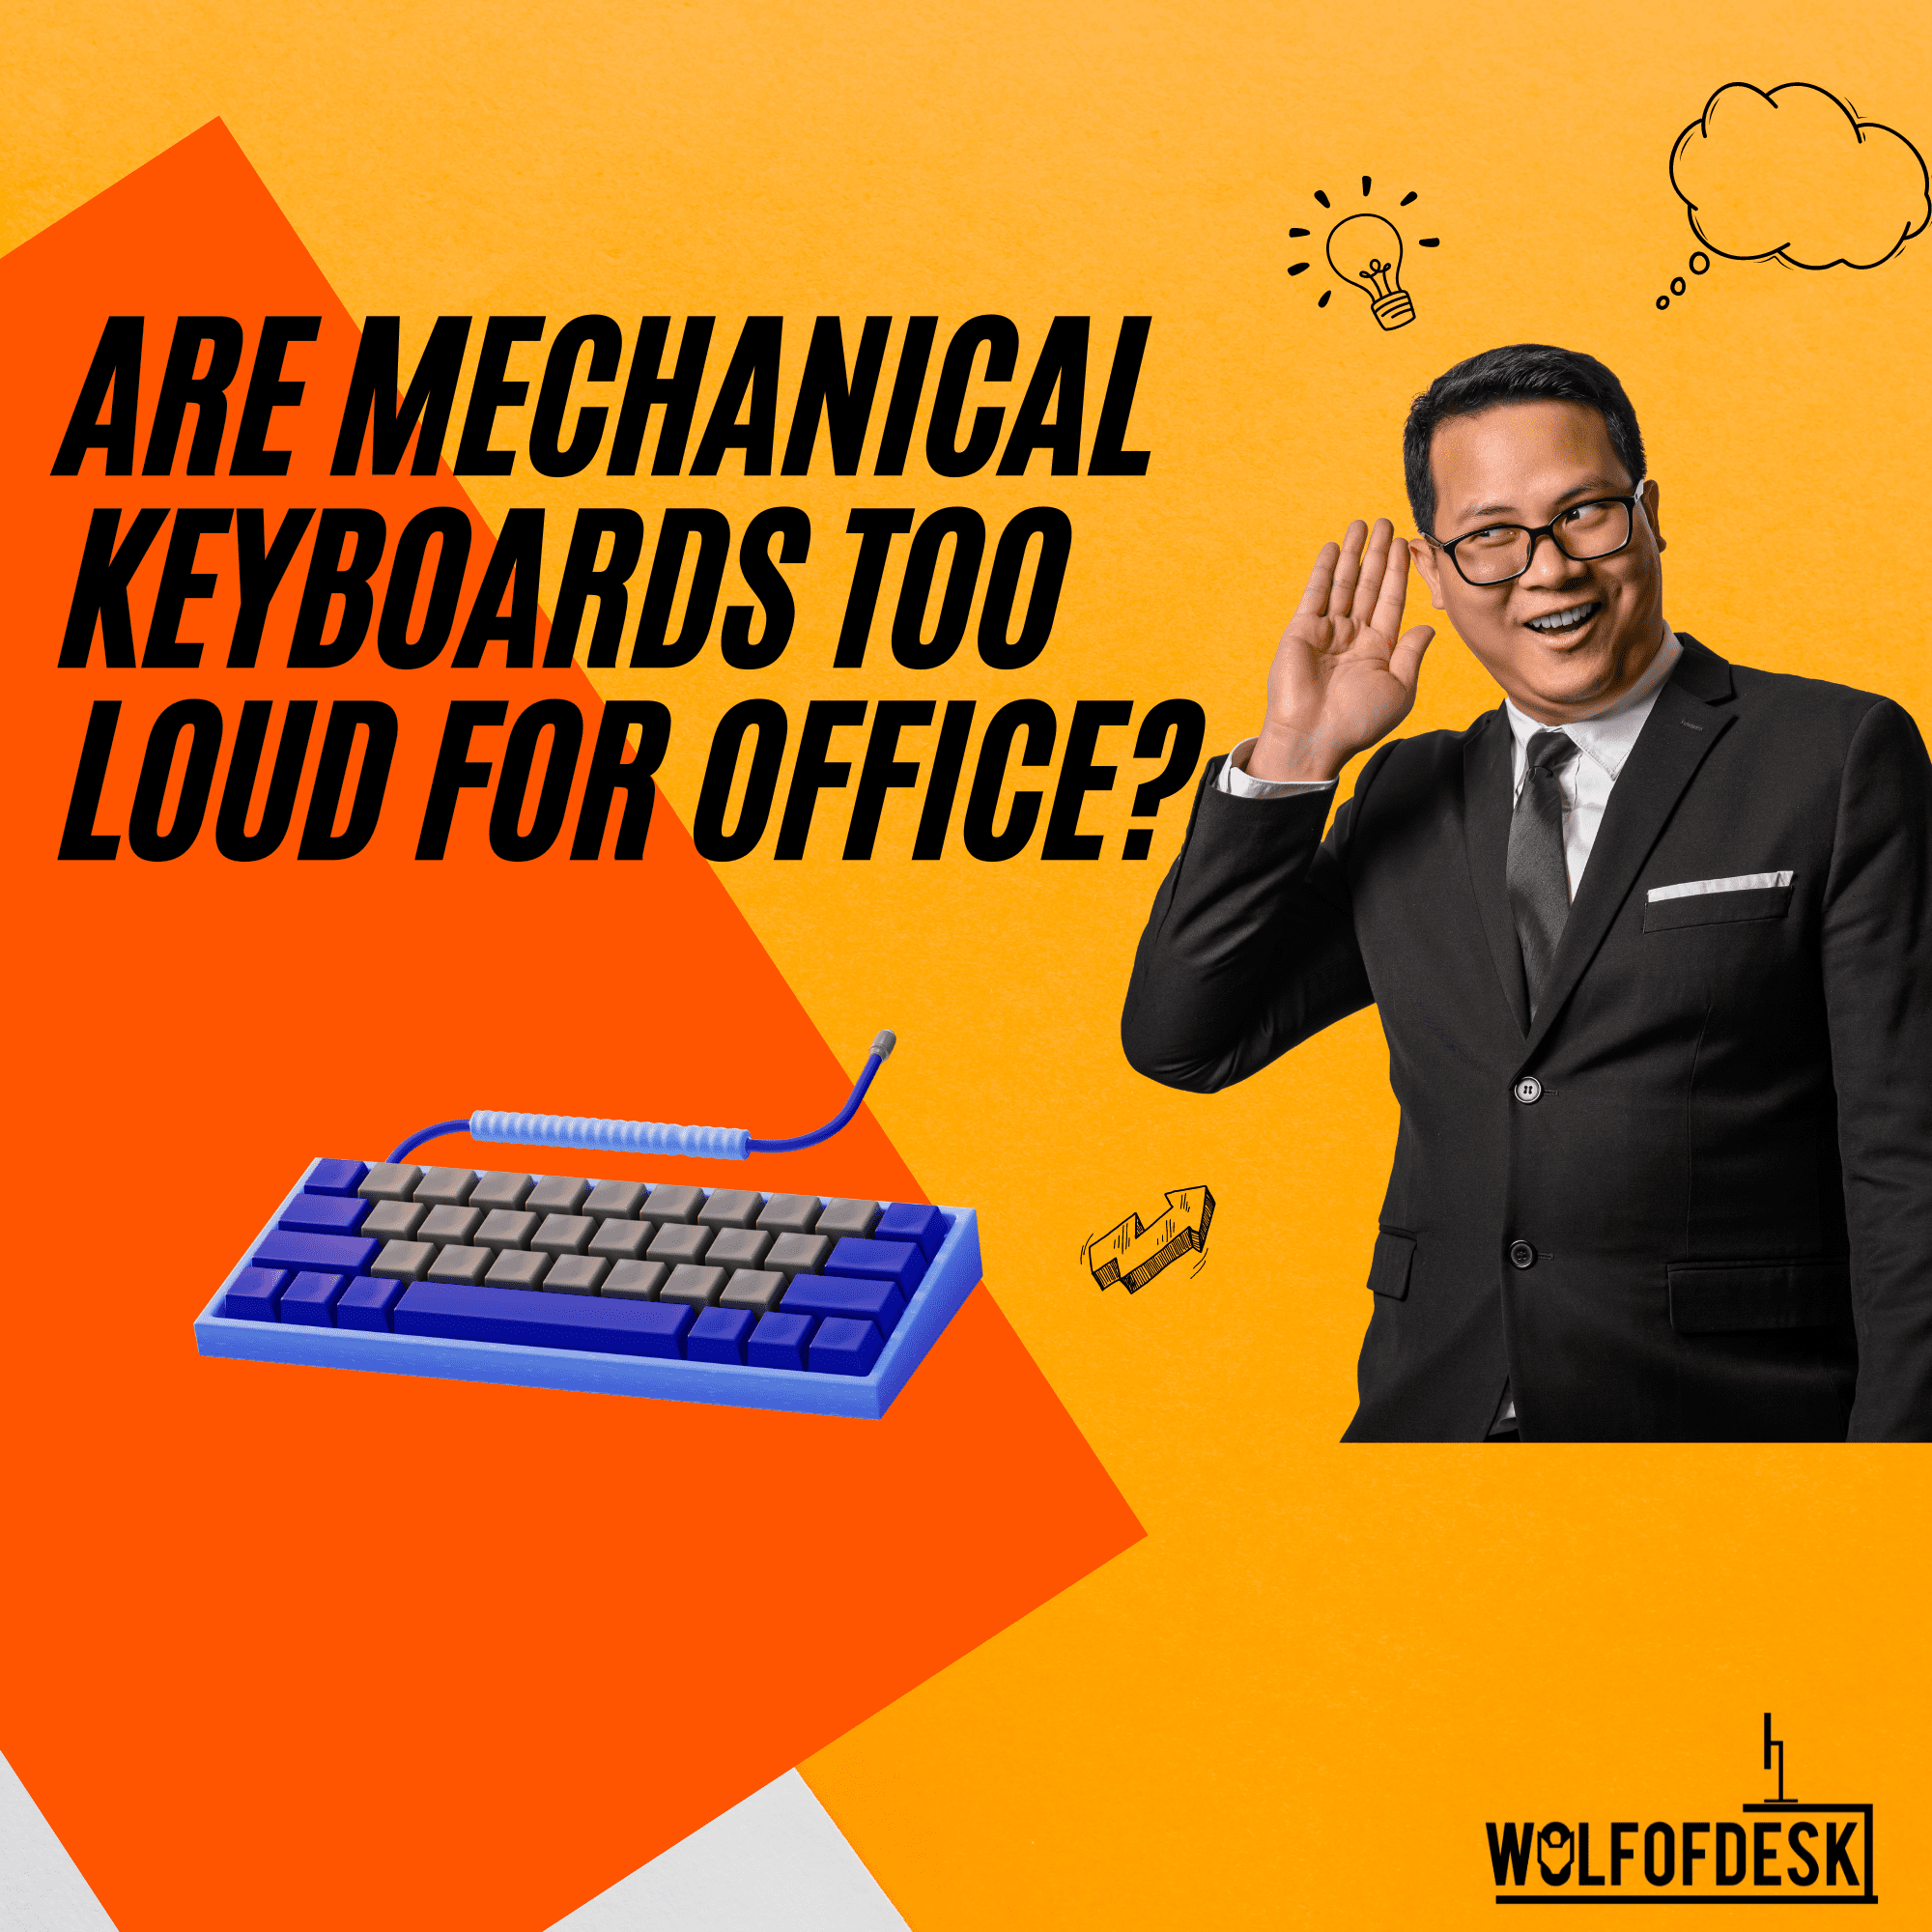 are mechanical keyboards too loud for the office work - answered